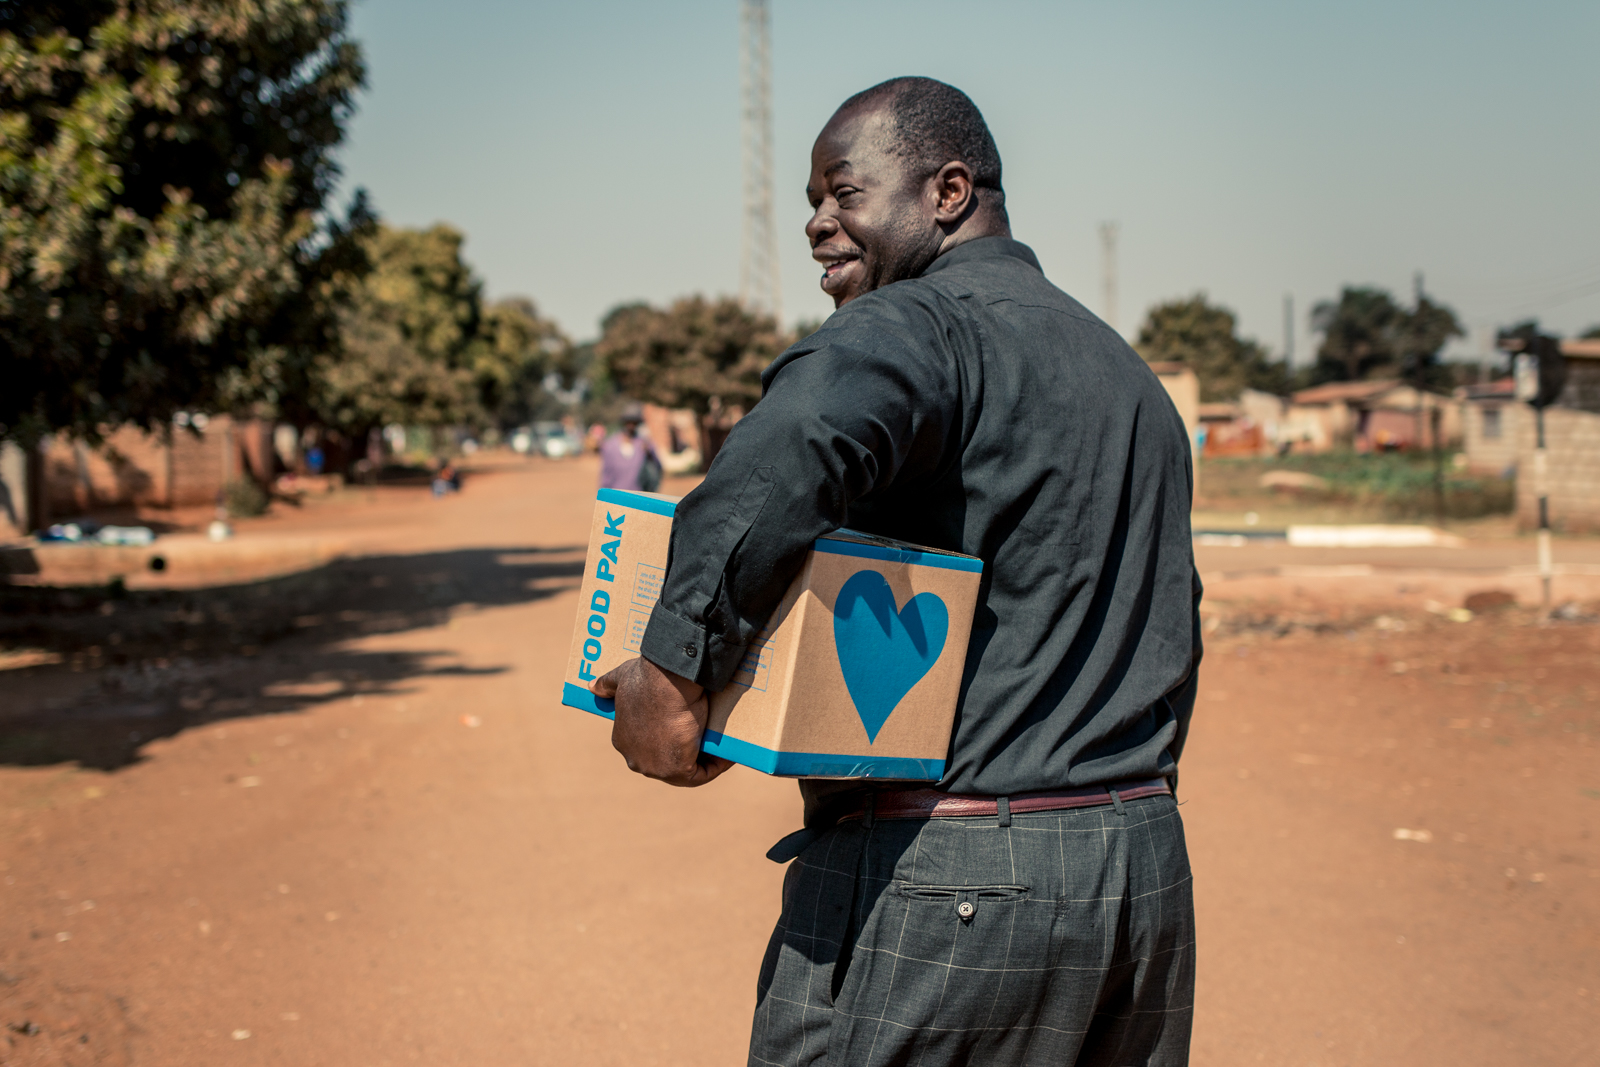  ZIMBABWE: [Home Visit] This is Bishop Musakwa. He's smiling as we walked to his home to share this food box with his family. Many times the pastors themselves are supported by the Food Pak ministry. We encourage the churches to prioritize meeting th